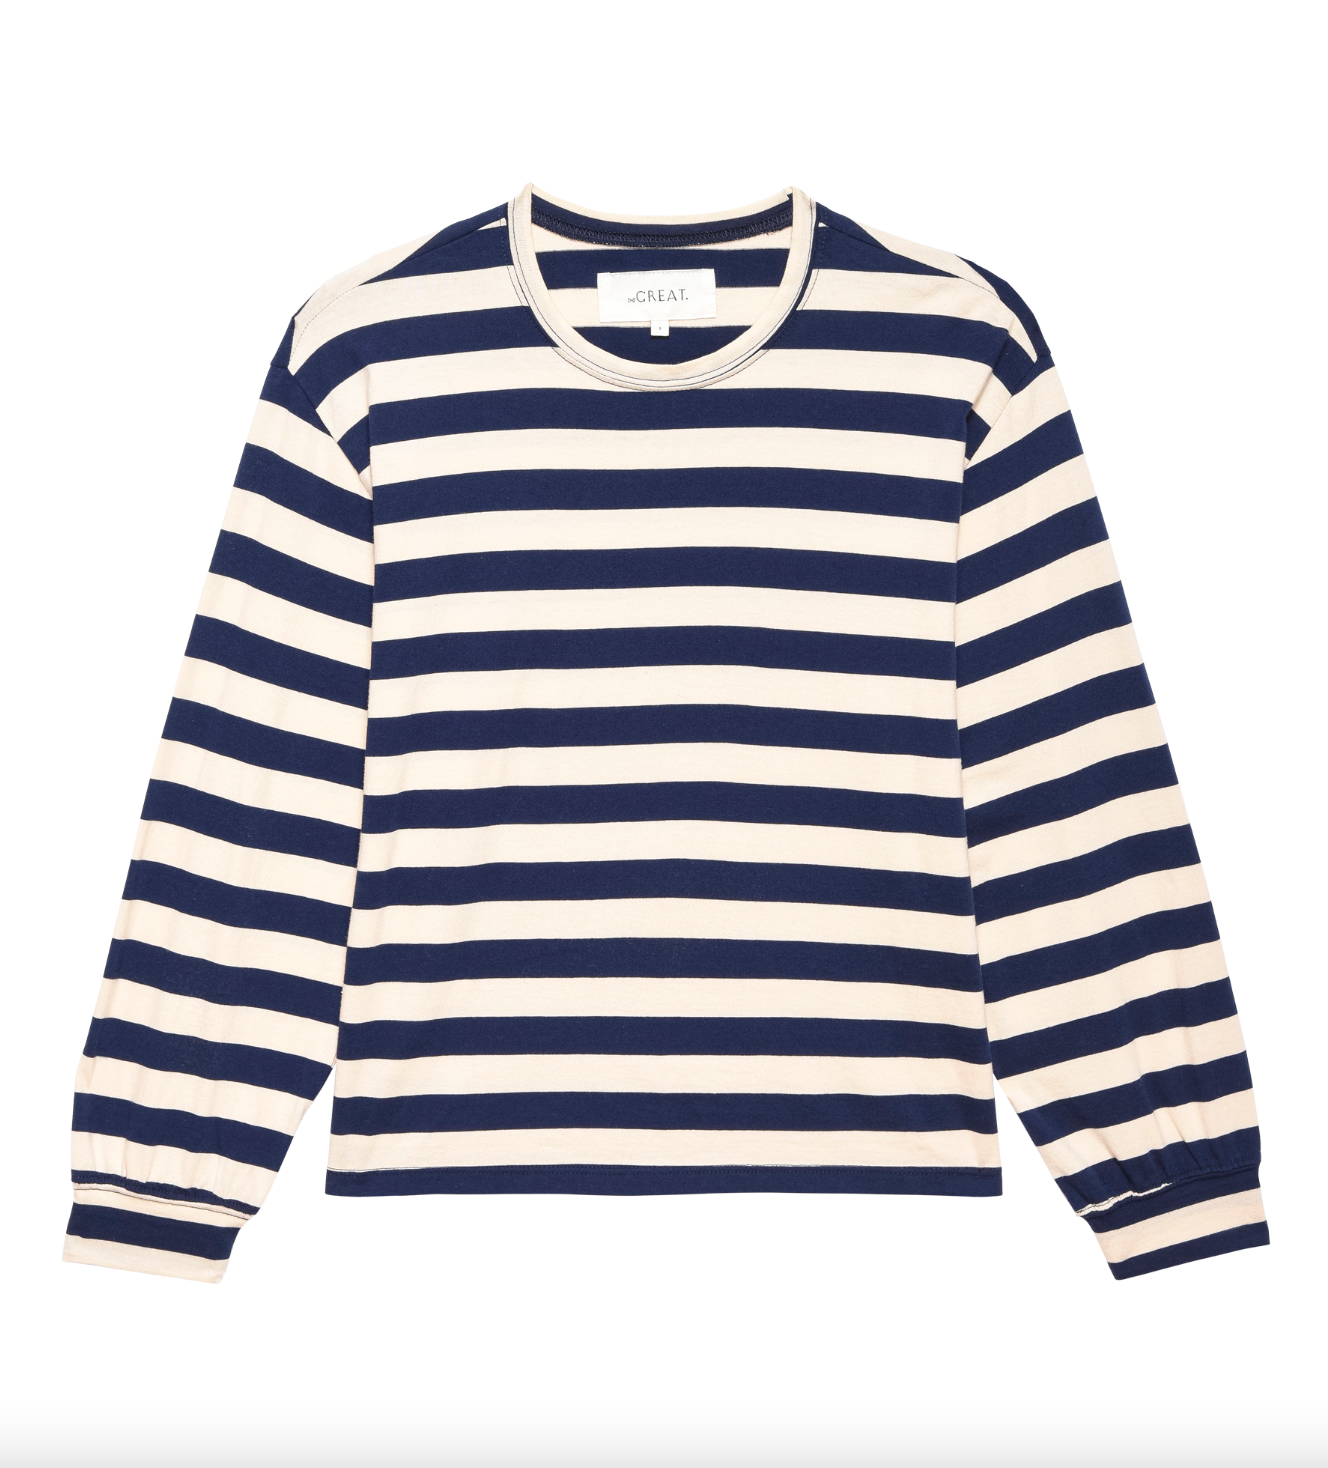 A long-sleeved shirt with horizontal navy blue and white stripes, reminiscent of a cozy bungalow in Scottsdale, Arizona. It has a round neckline with a white label inside at the back. The Great Inc.'s THE CAMPUS CREW NAVY AND CREAM SCHOLAR STRIPE fabric appears soft and comfortable, and the design is simple and classic.